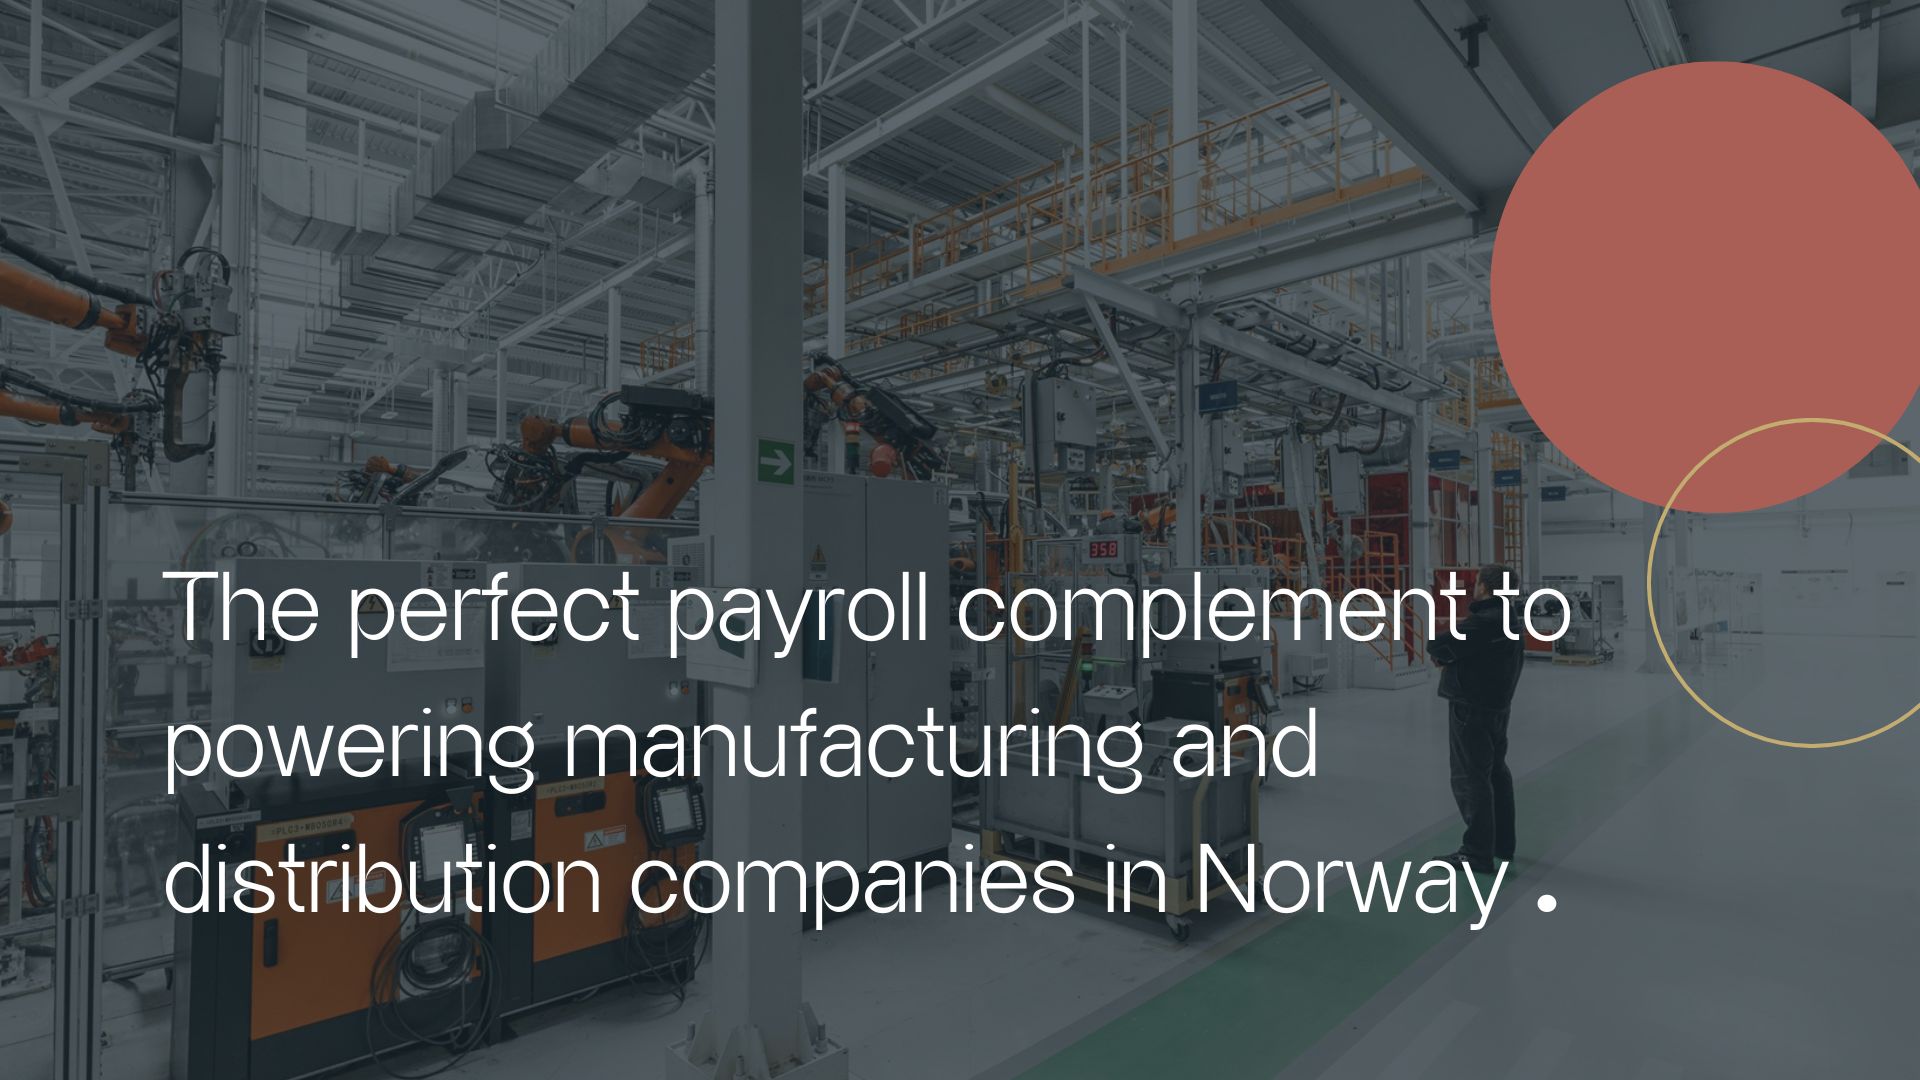 The perfect payroll complement to powering manufacturing and distribution companies in Norway NO LOGO (1)